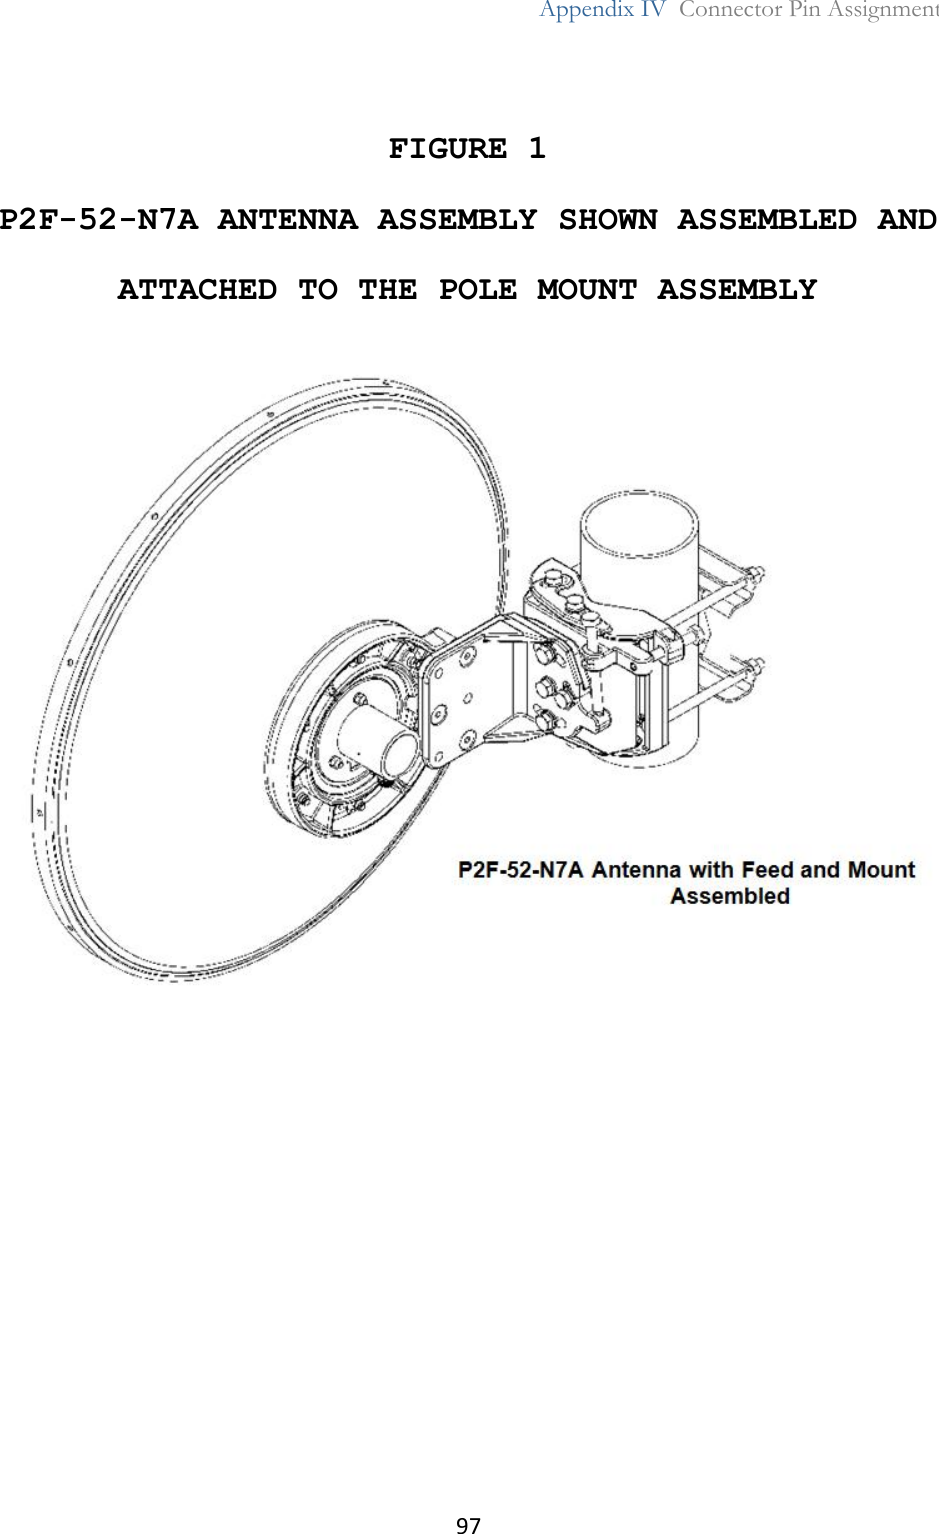 97  Appendix IV  Connector Pin Assignment   FIGURE 1 P2F-52-N7A ANTENNA ASSEMBLY SHOWN ASSEMBLED AND ATTACHED TO THE POLE MOUNT ASSEMBLY        